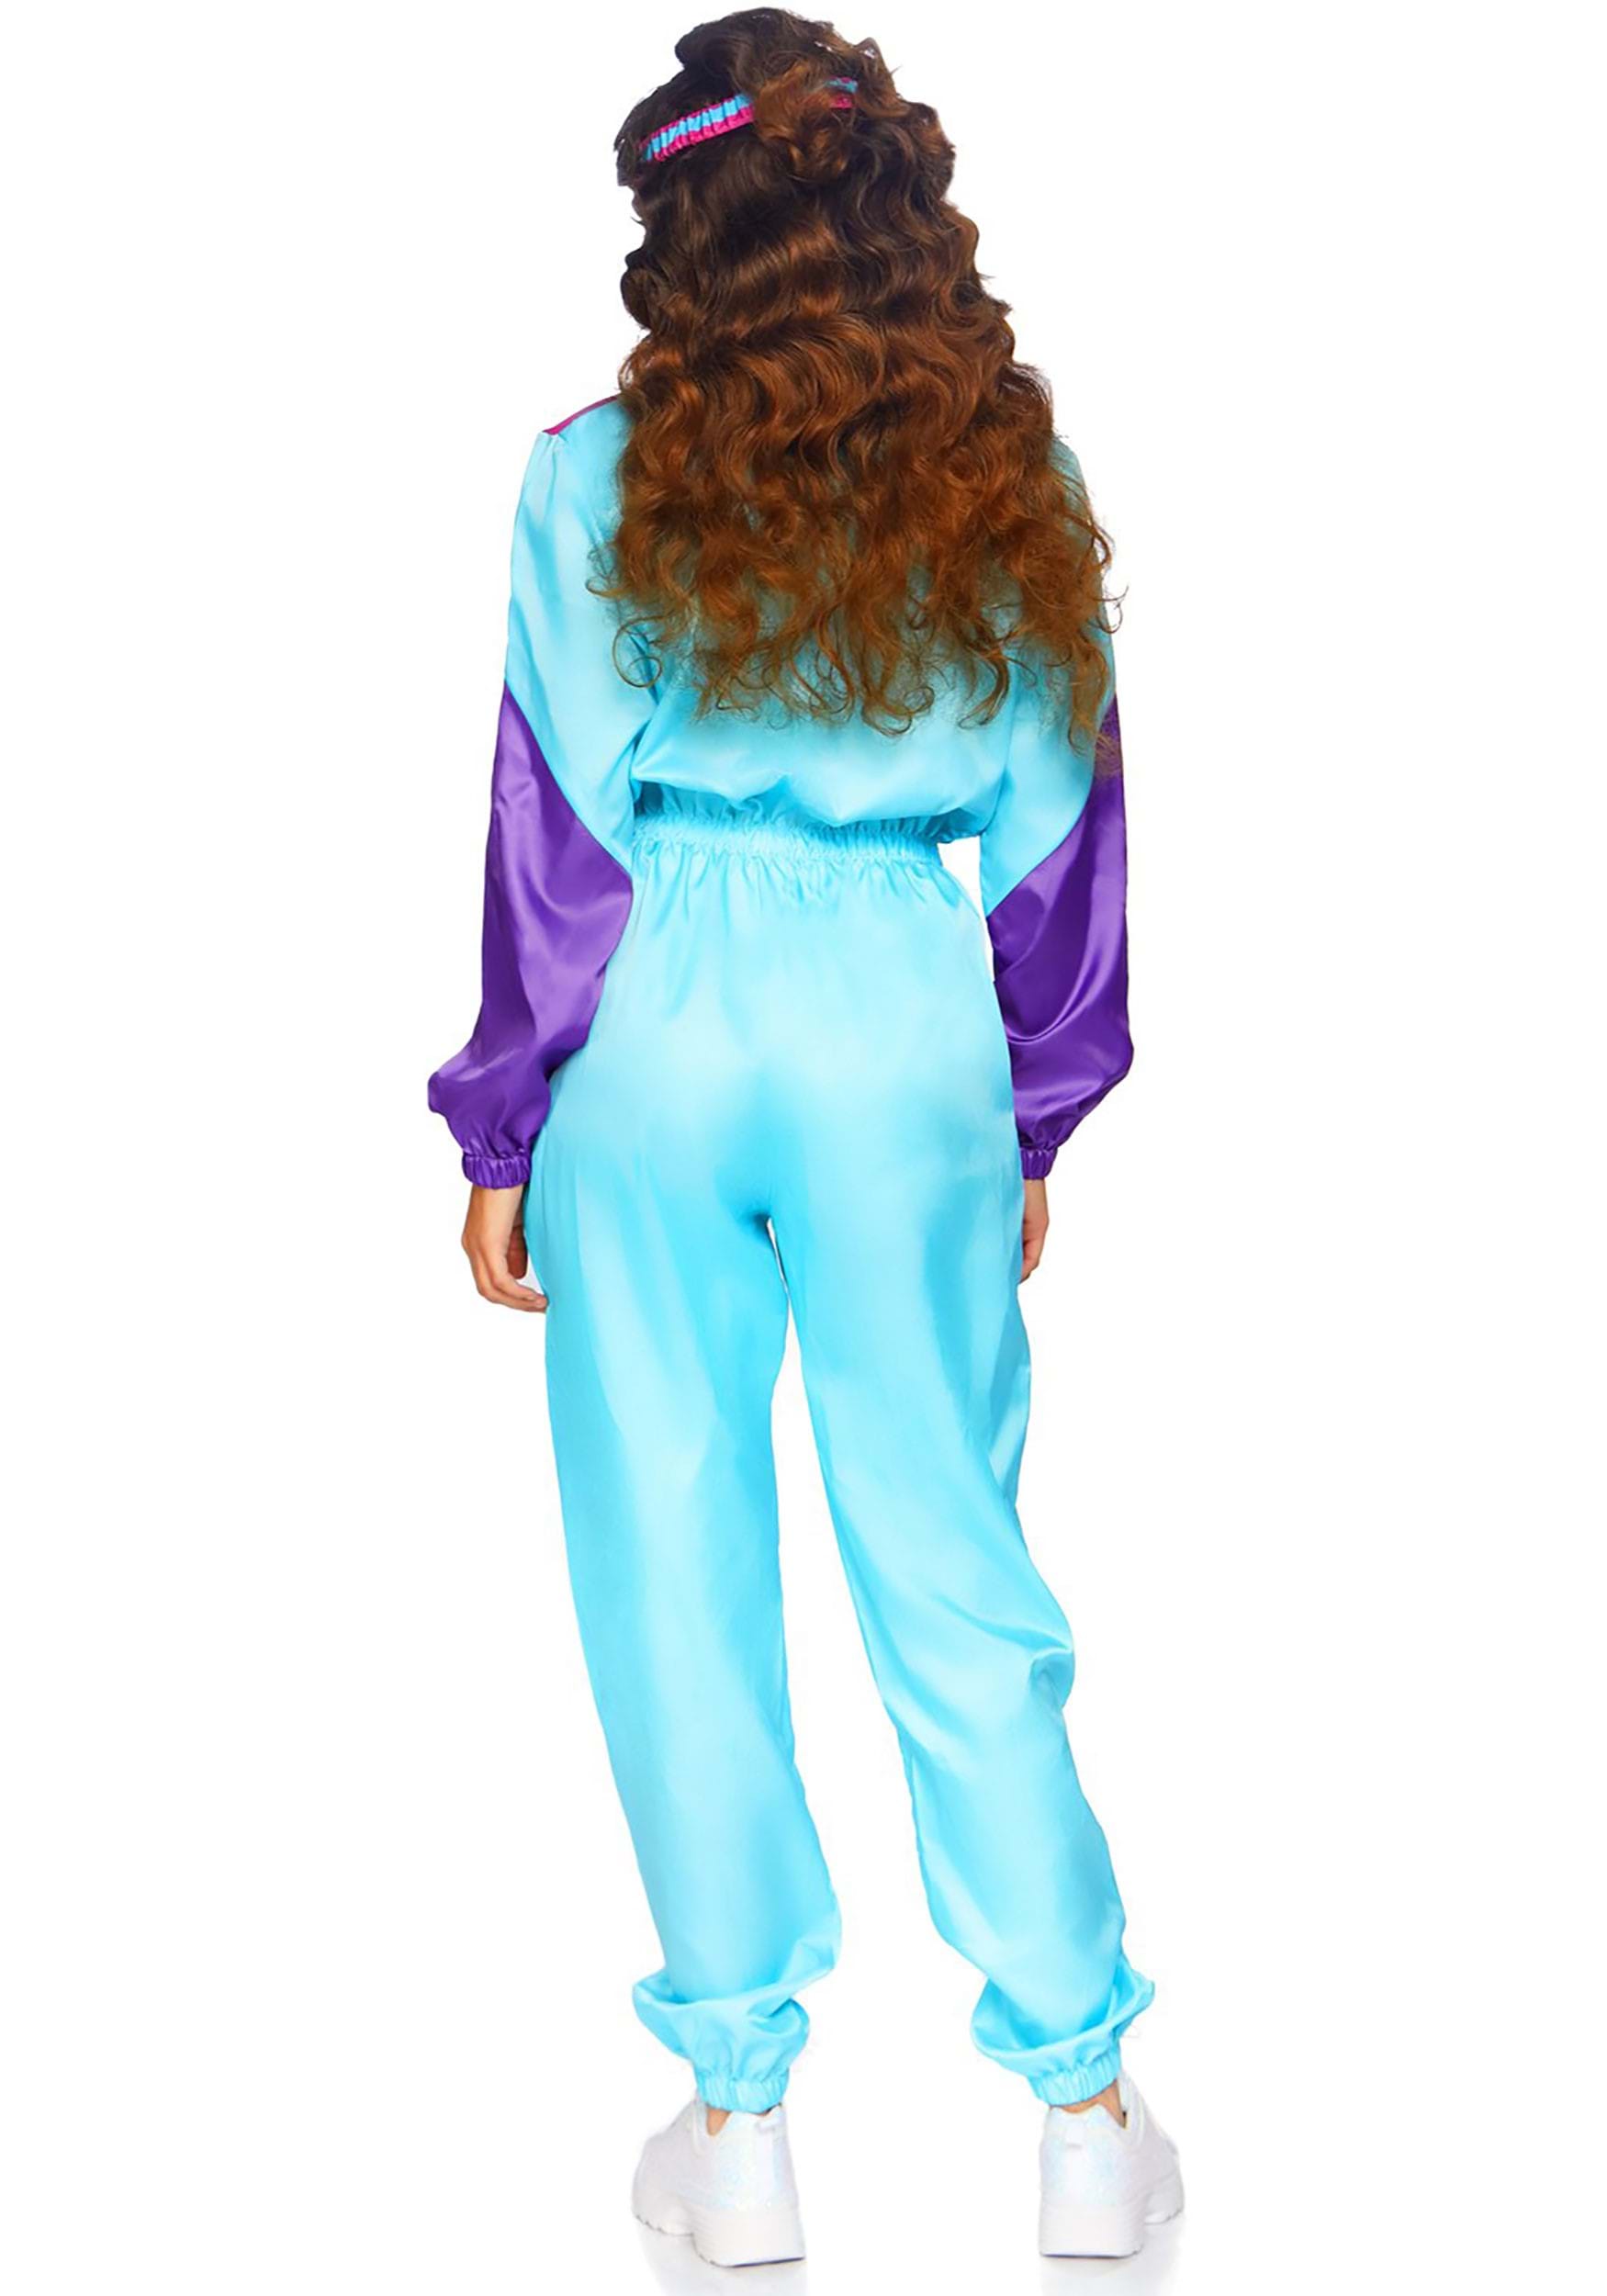 Awesome 80s Ski Suit Costume For Women